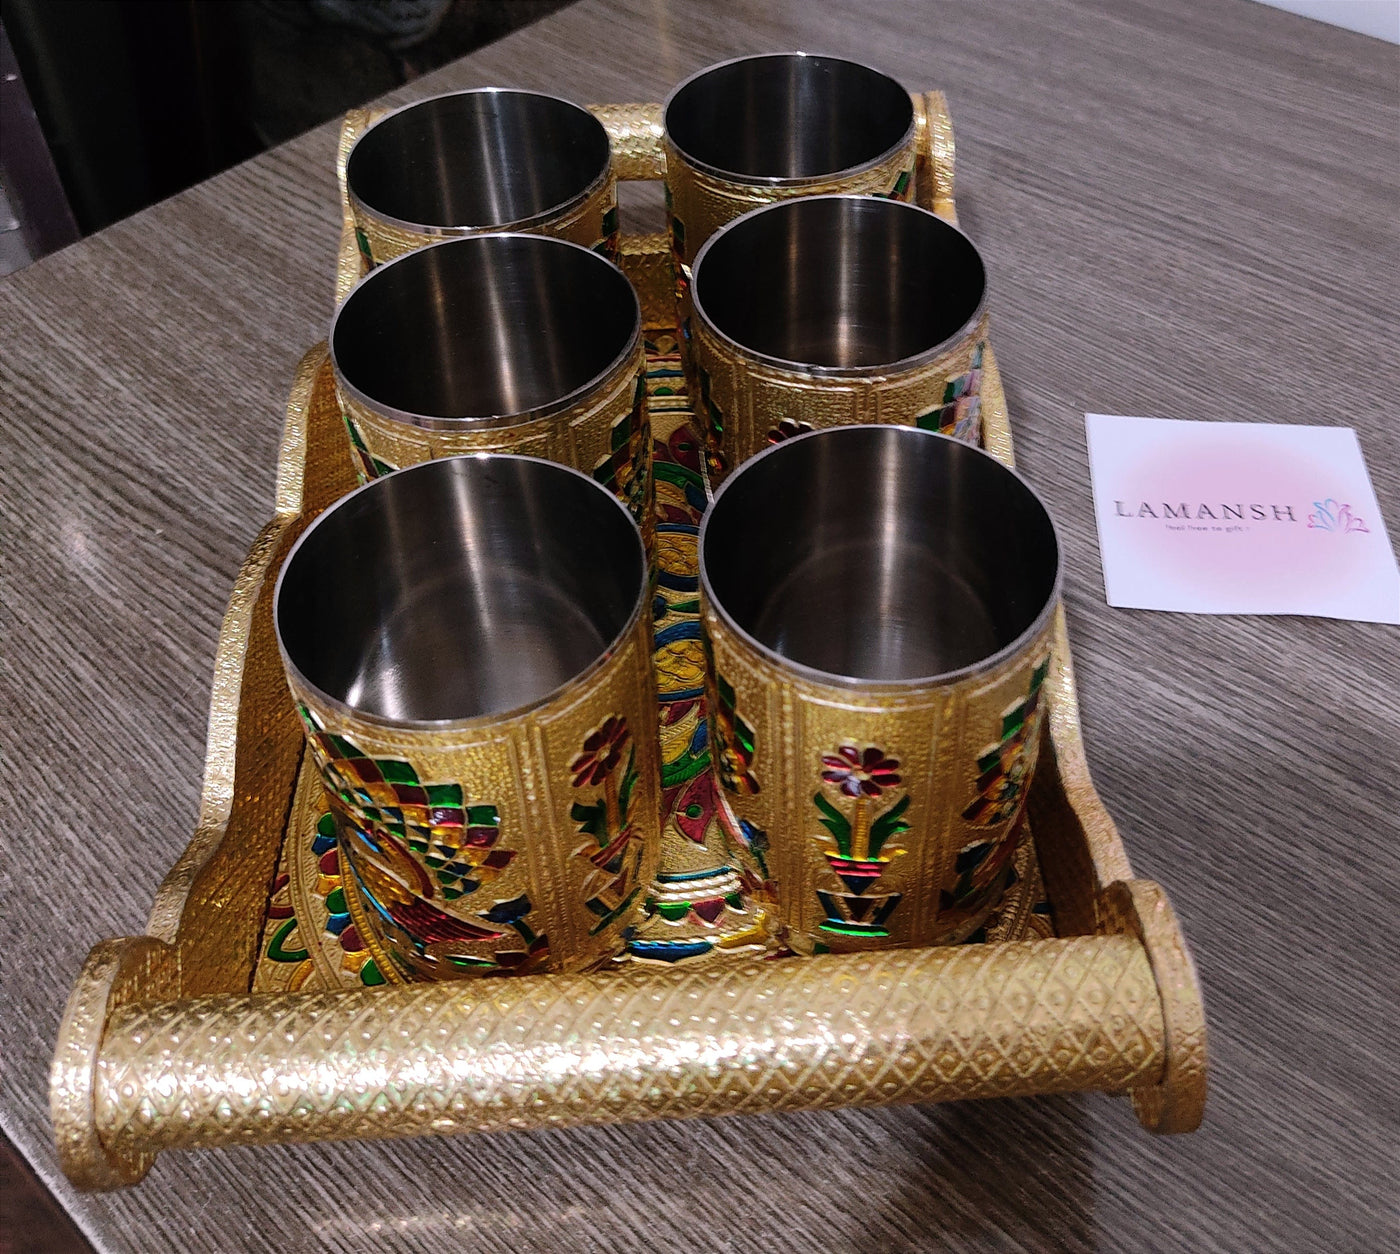 650 Rs each set on buying 🏷in bulk | Call 📞 at 8619550223 meenakari tray glass set LAMANSH® Meenakari Tray & Glasses set for Wedding Favors & Return Gifting 🎁